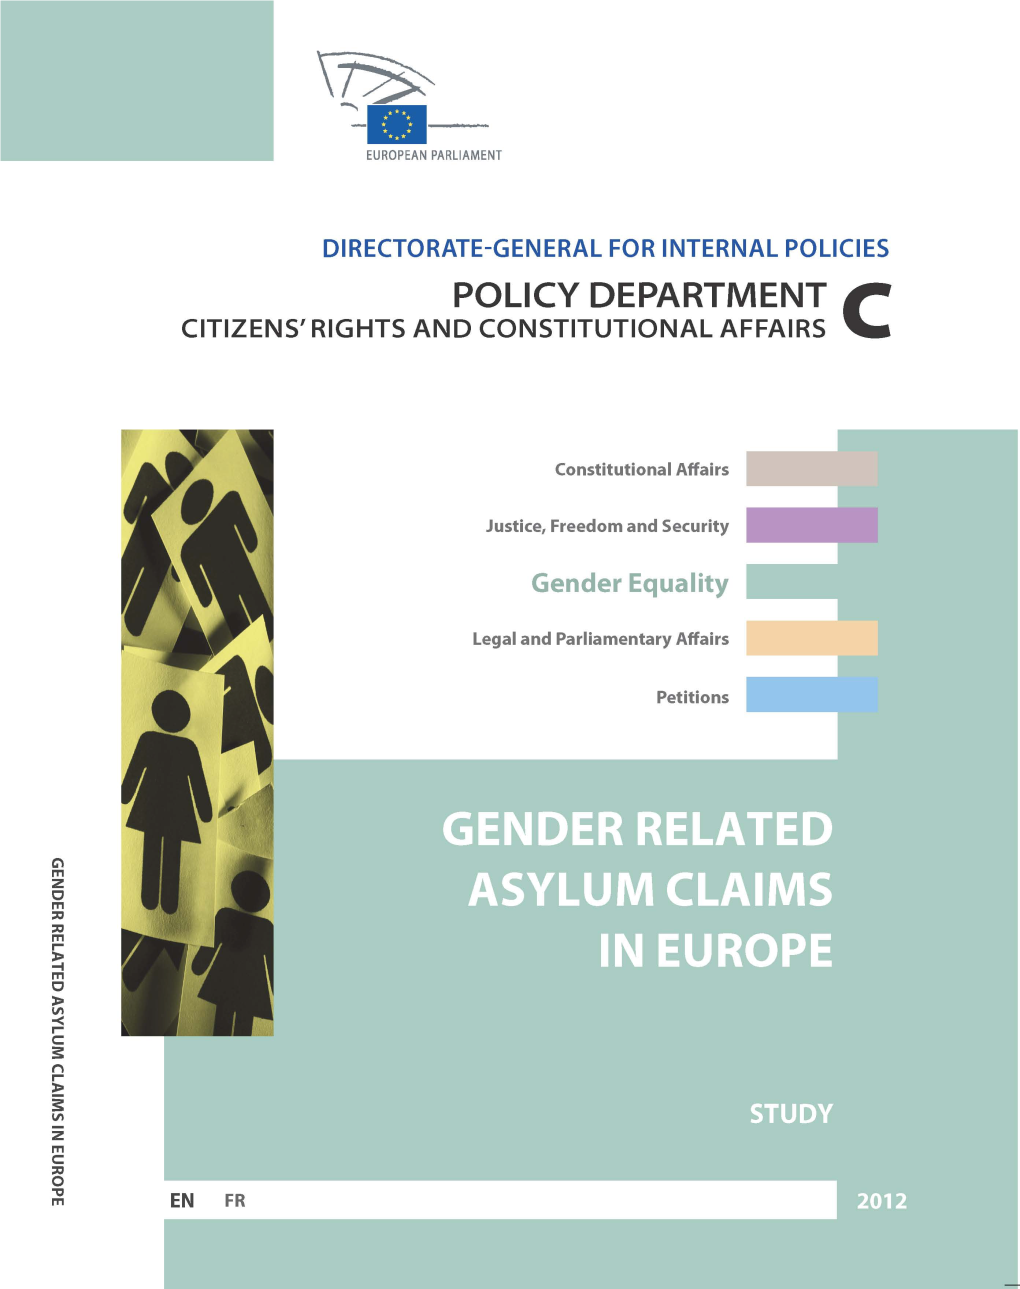 Gender-Related Asylum Claims in Europe (2012)